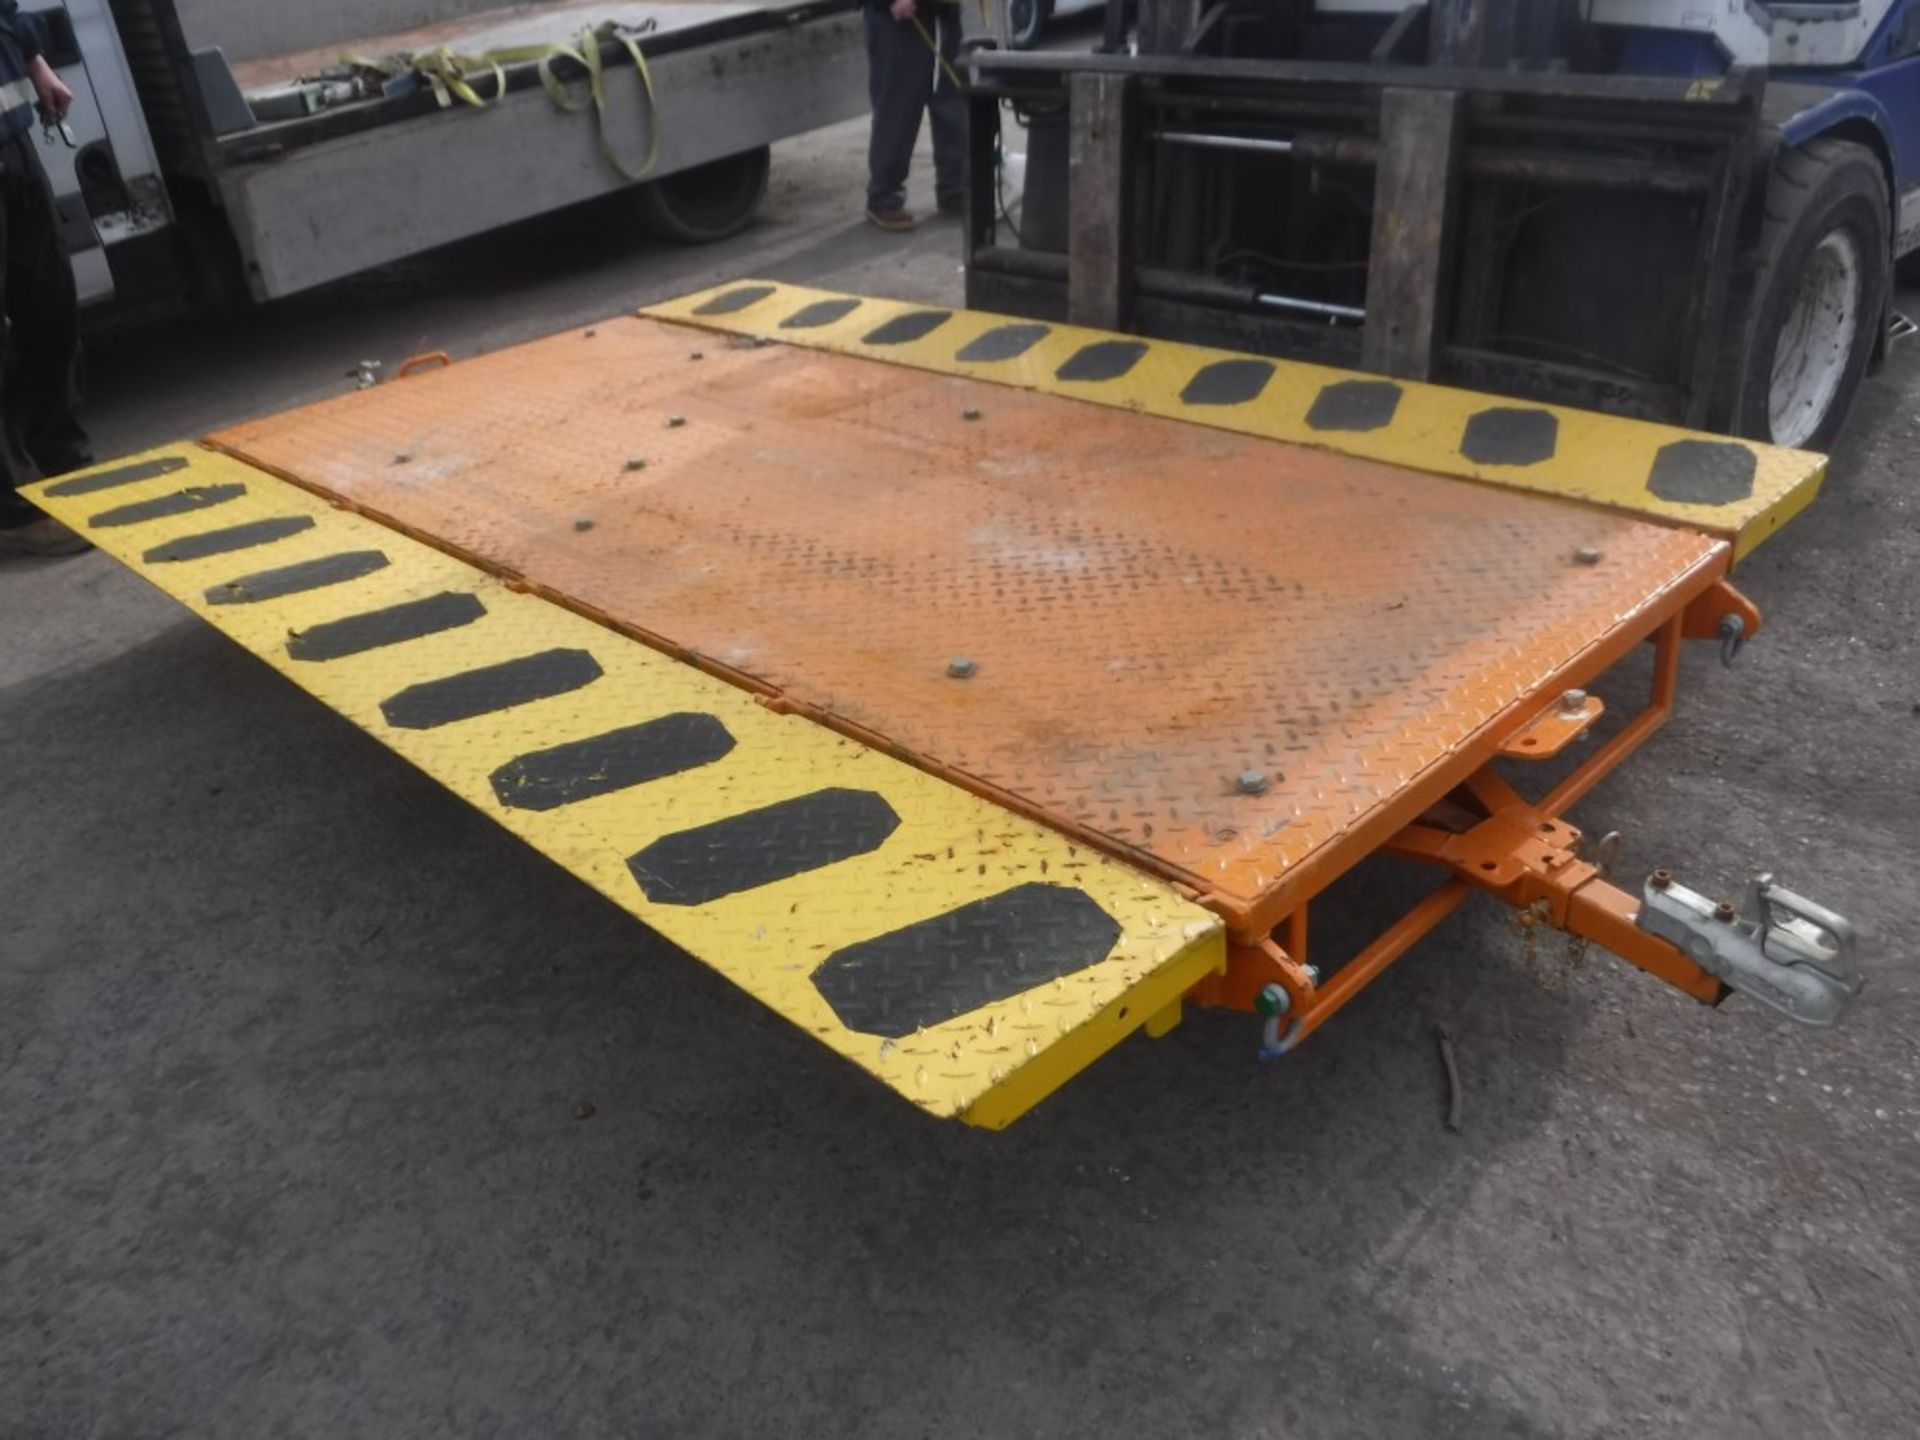 TRAILER/BUGGY WITH TURNTABLES, DRAWBAR FRONT/BACK (1) [NO VAT]